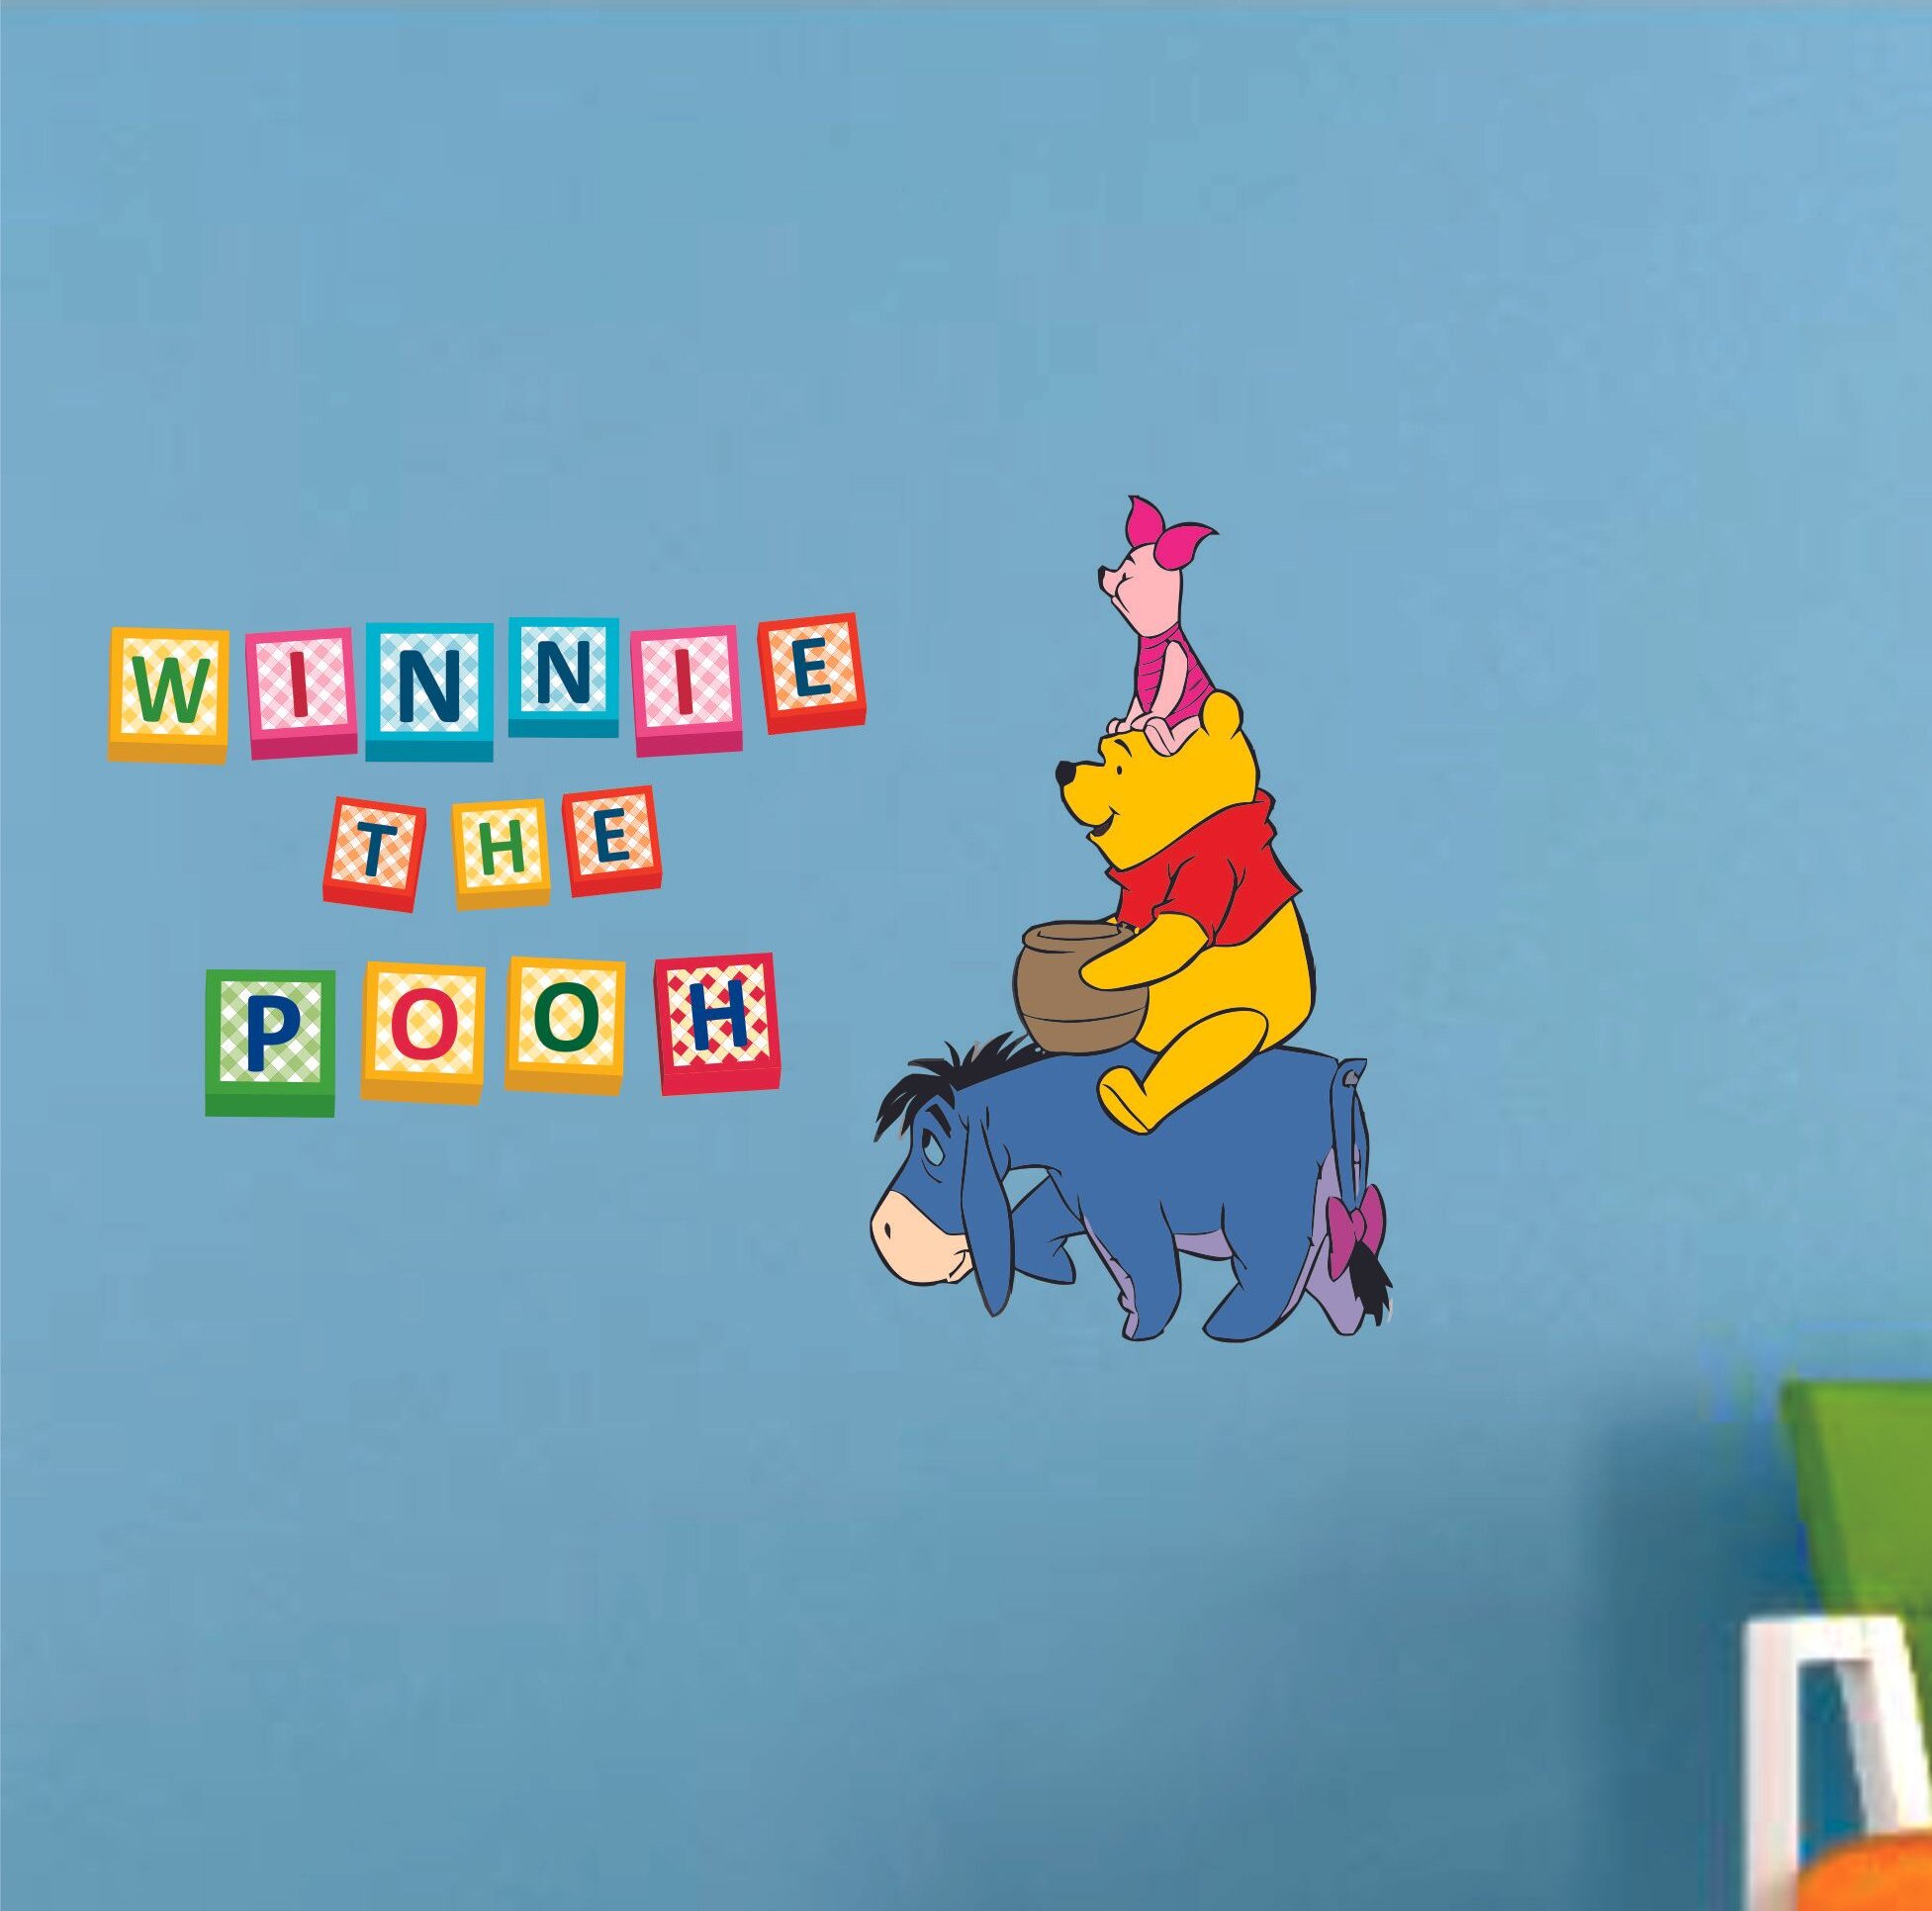 Whinnie the Pooh Quote Wall Sticker Childrens Home Transfer Graphic Kids Decal